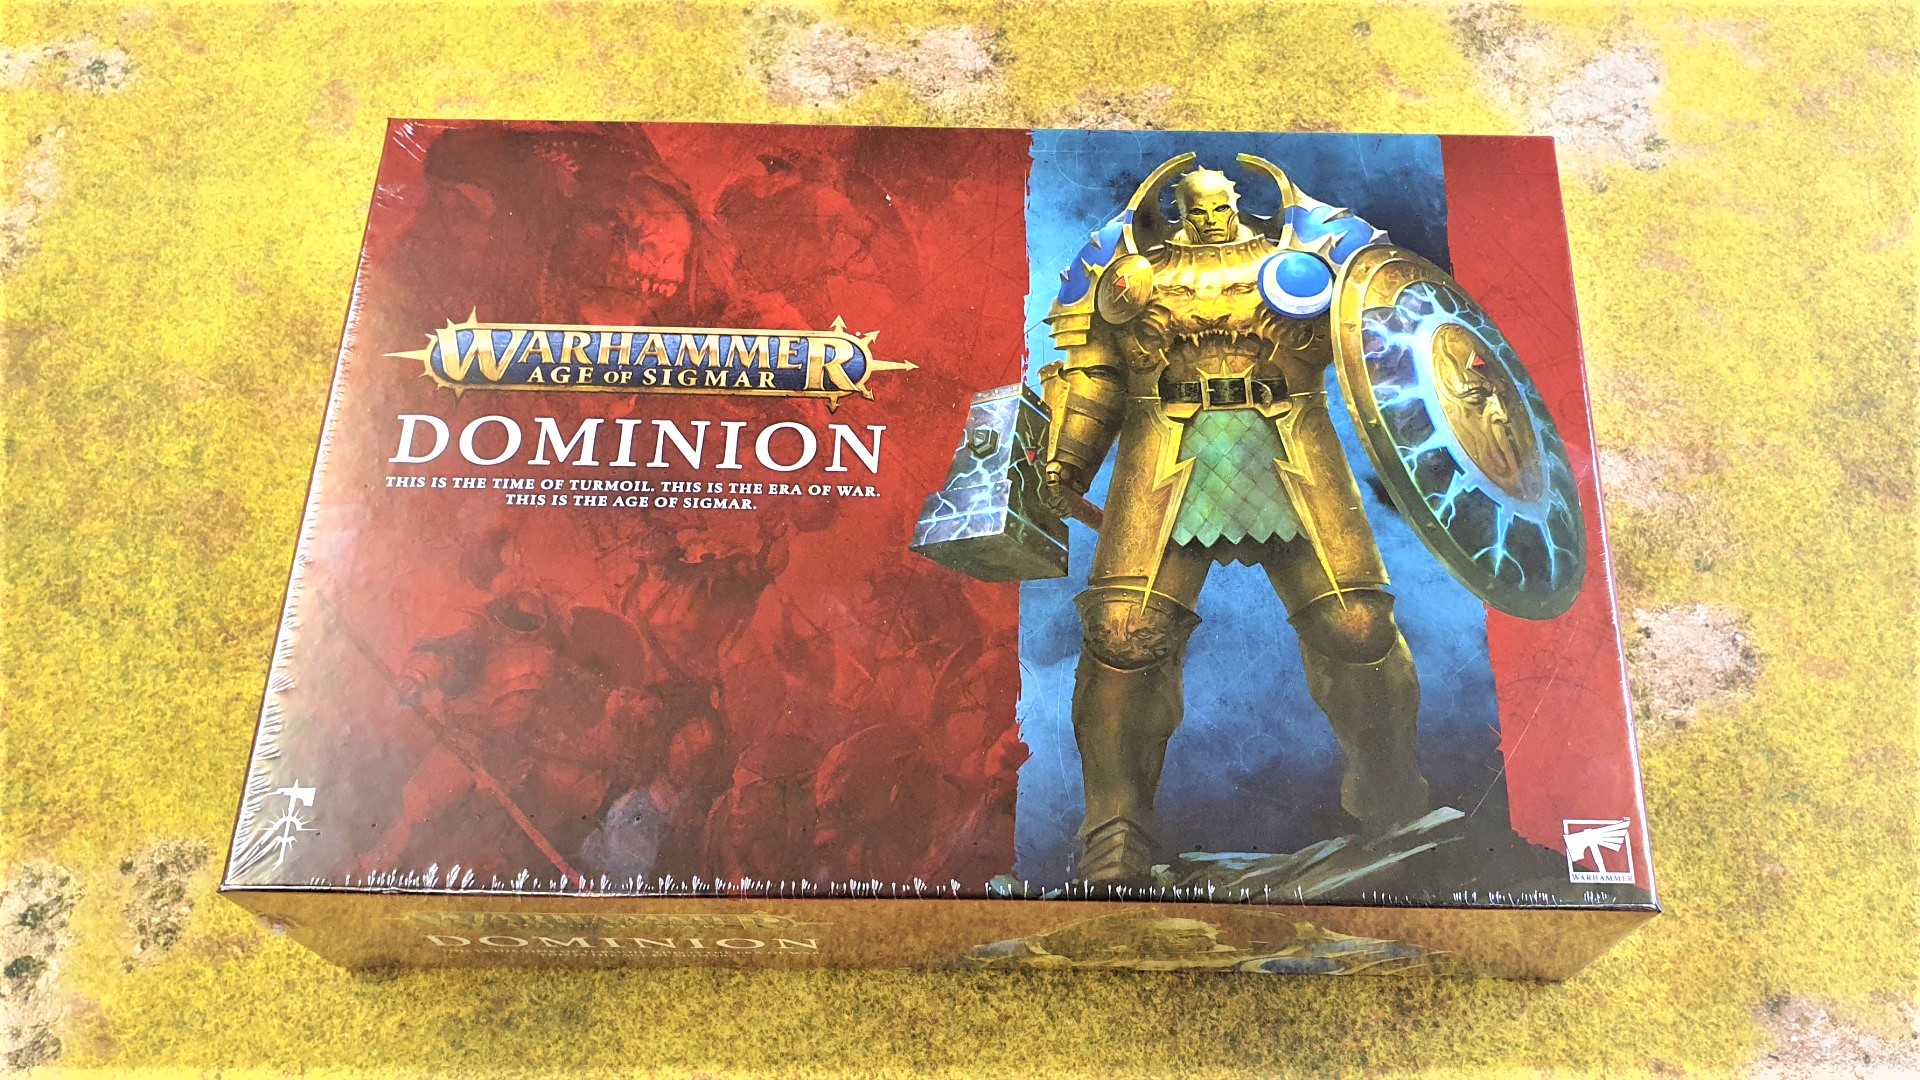 Warhammer Age of Sigmar: Dominion review – a god-king's welcome?